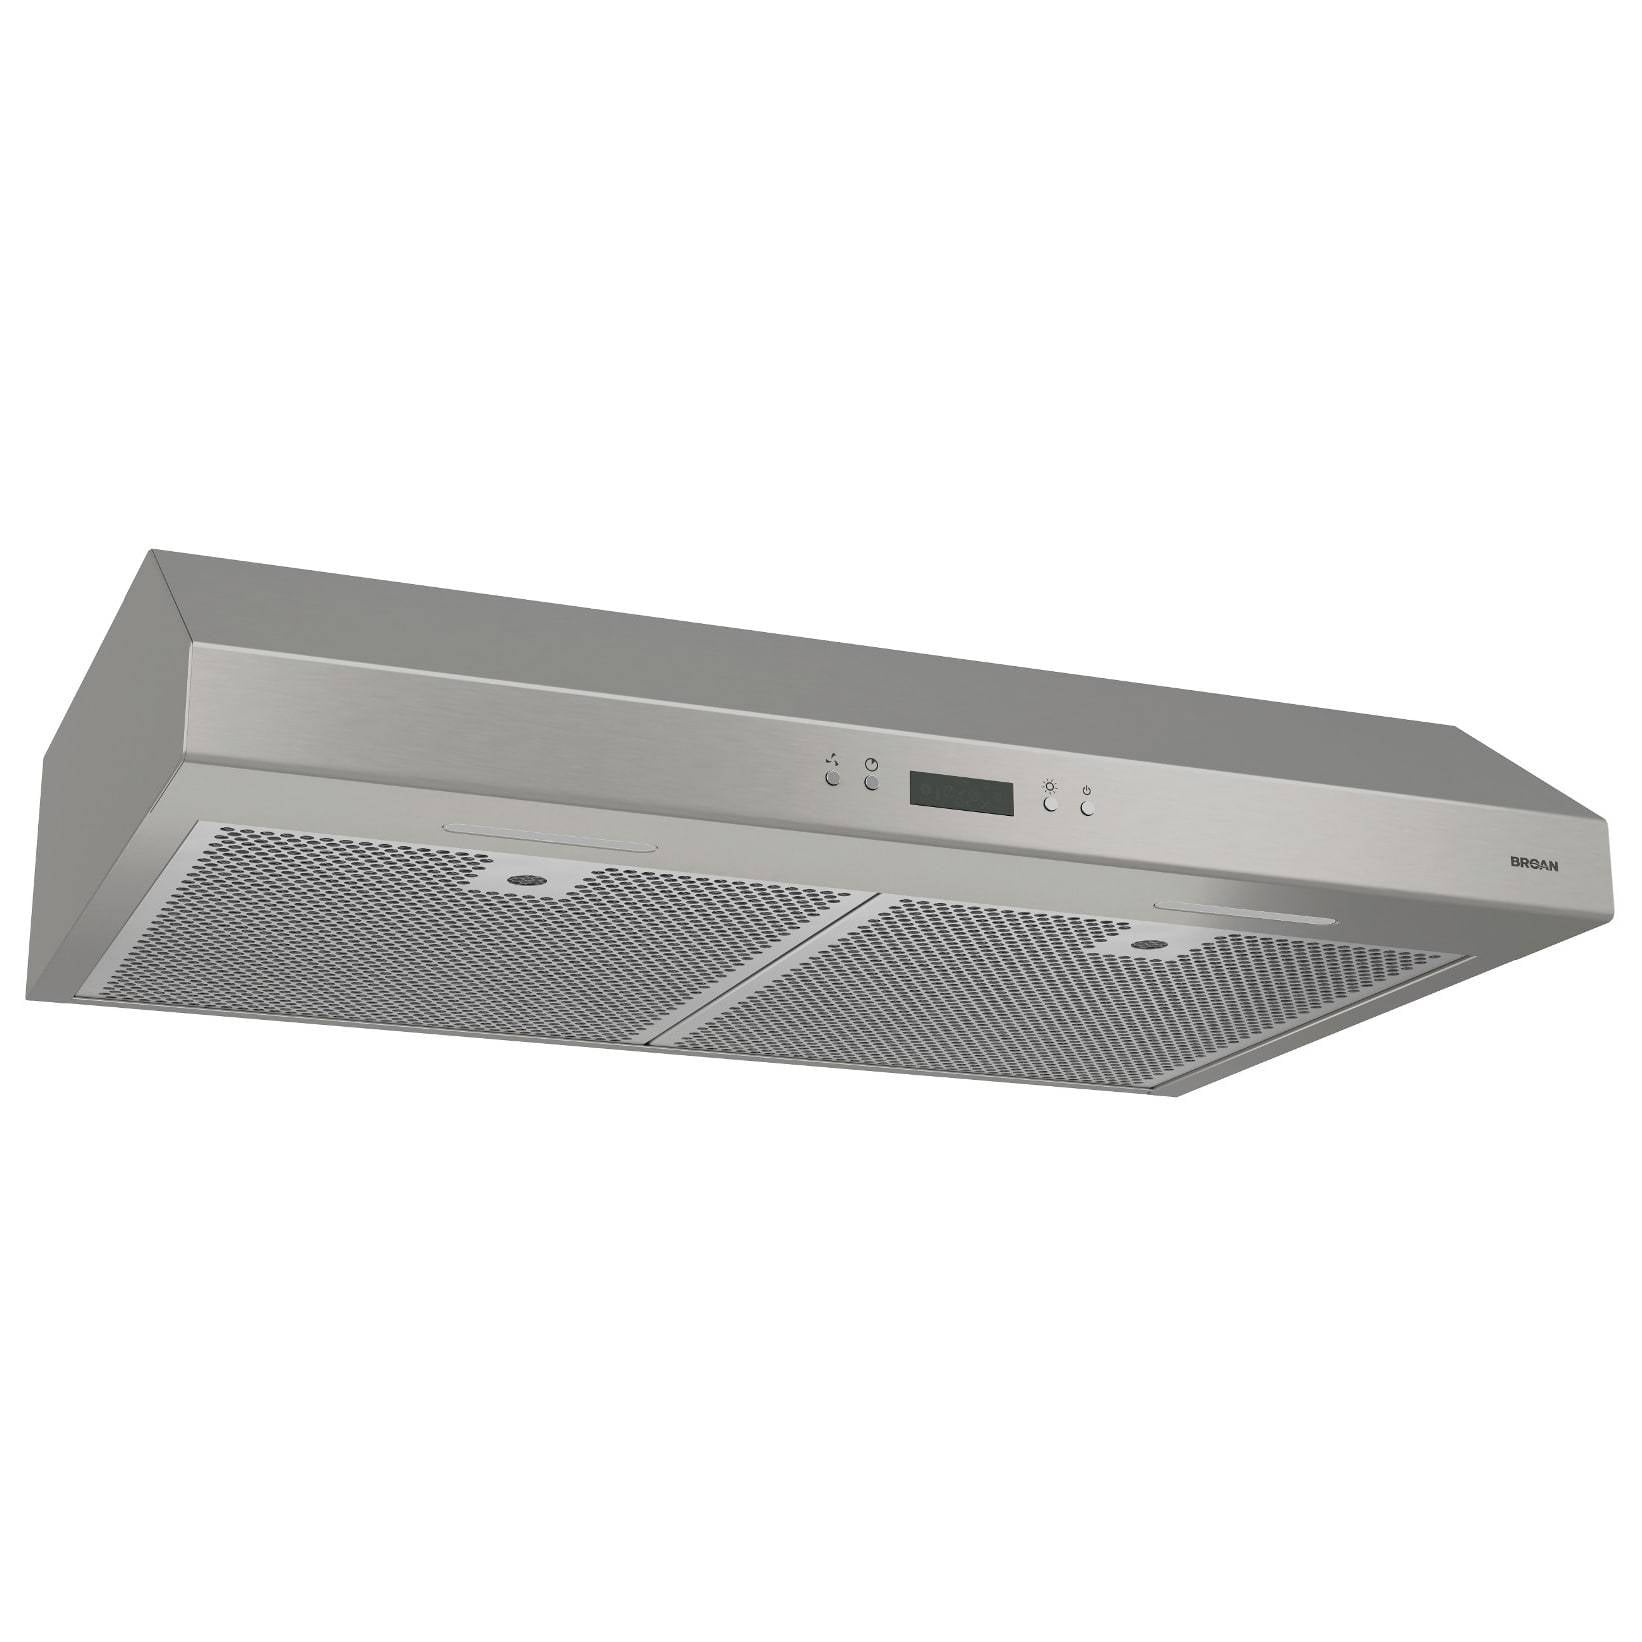 Details about   Broan-NuTone 413023 Ductless Range Hood Insert with Light Exhaust Fan for Under 